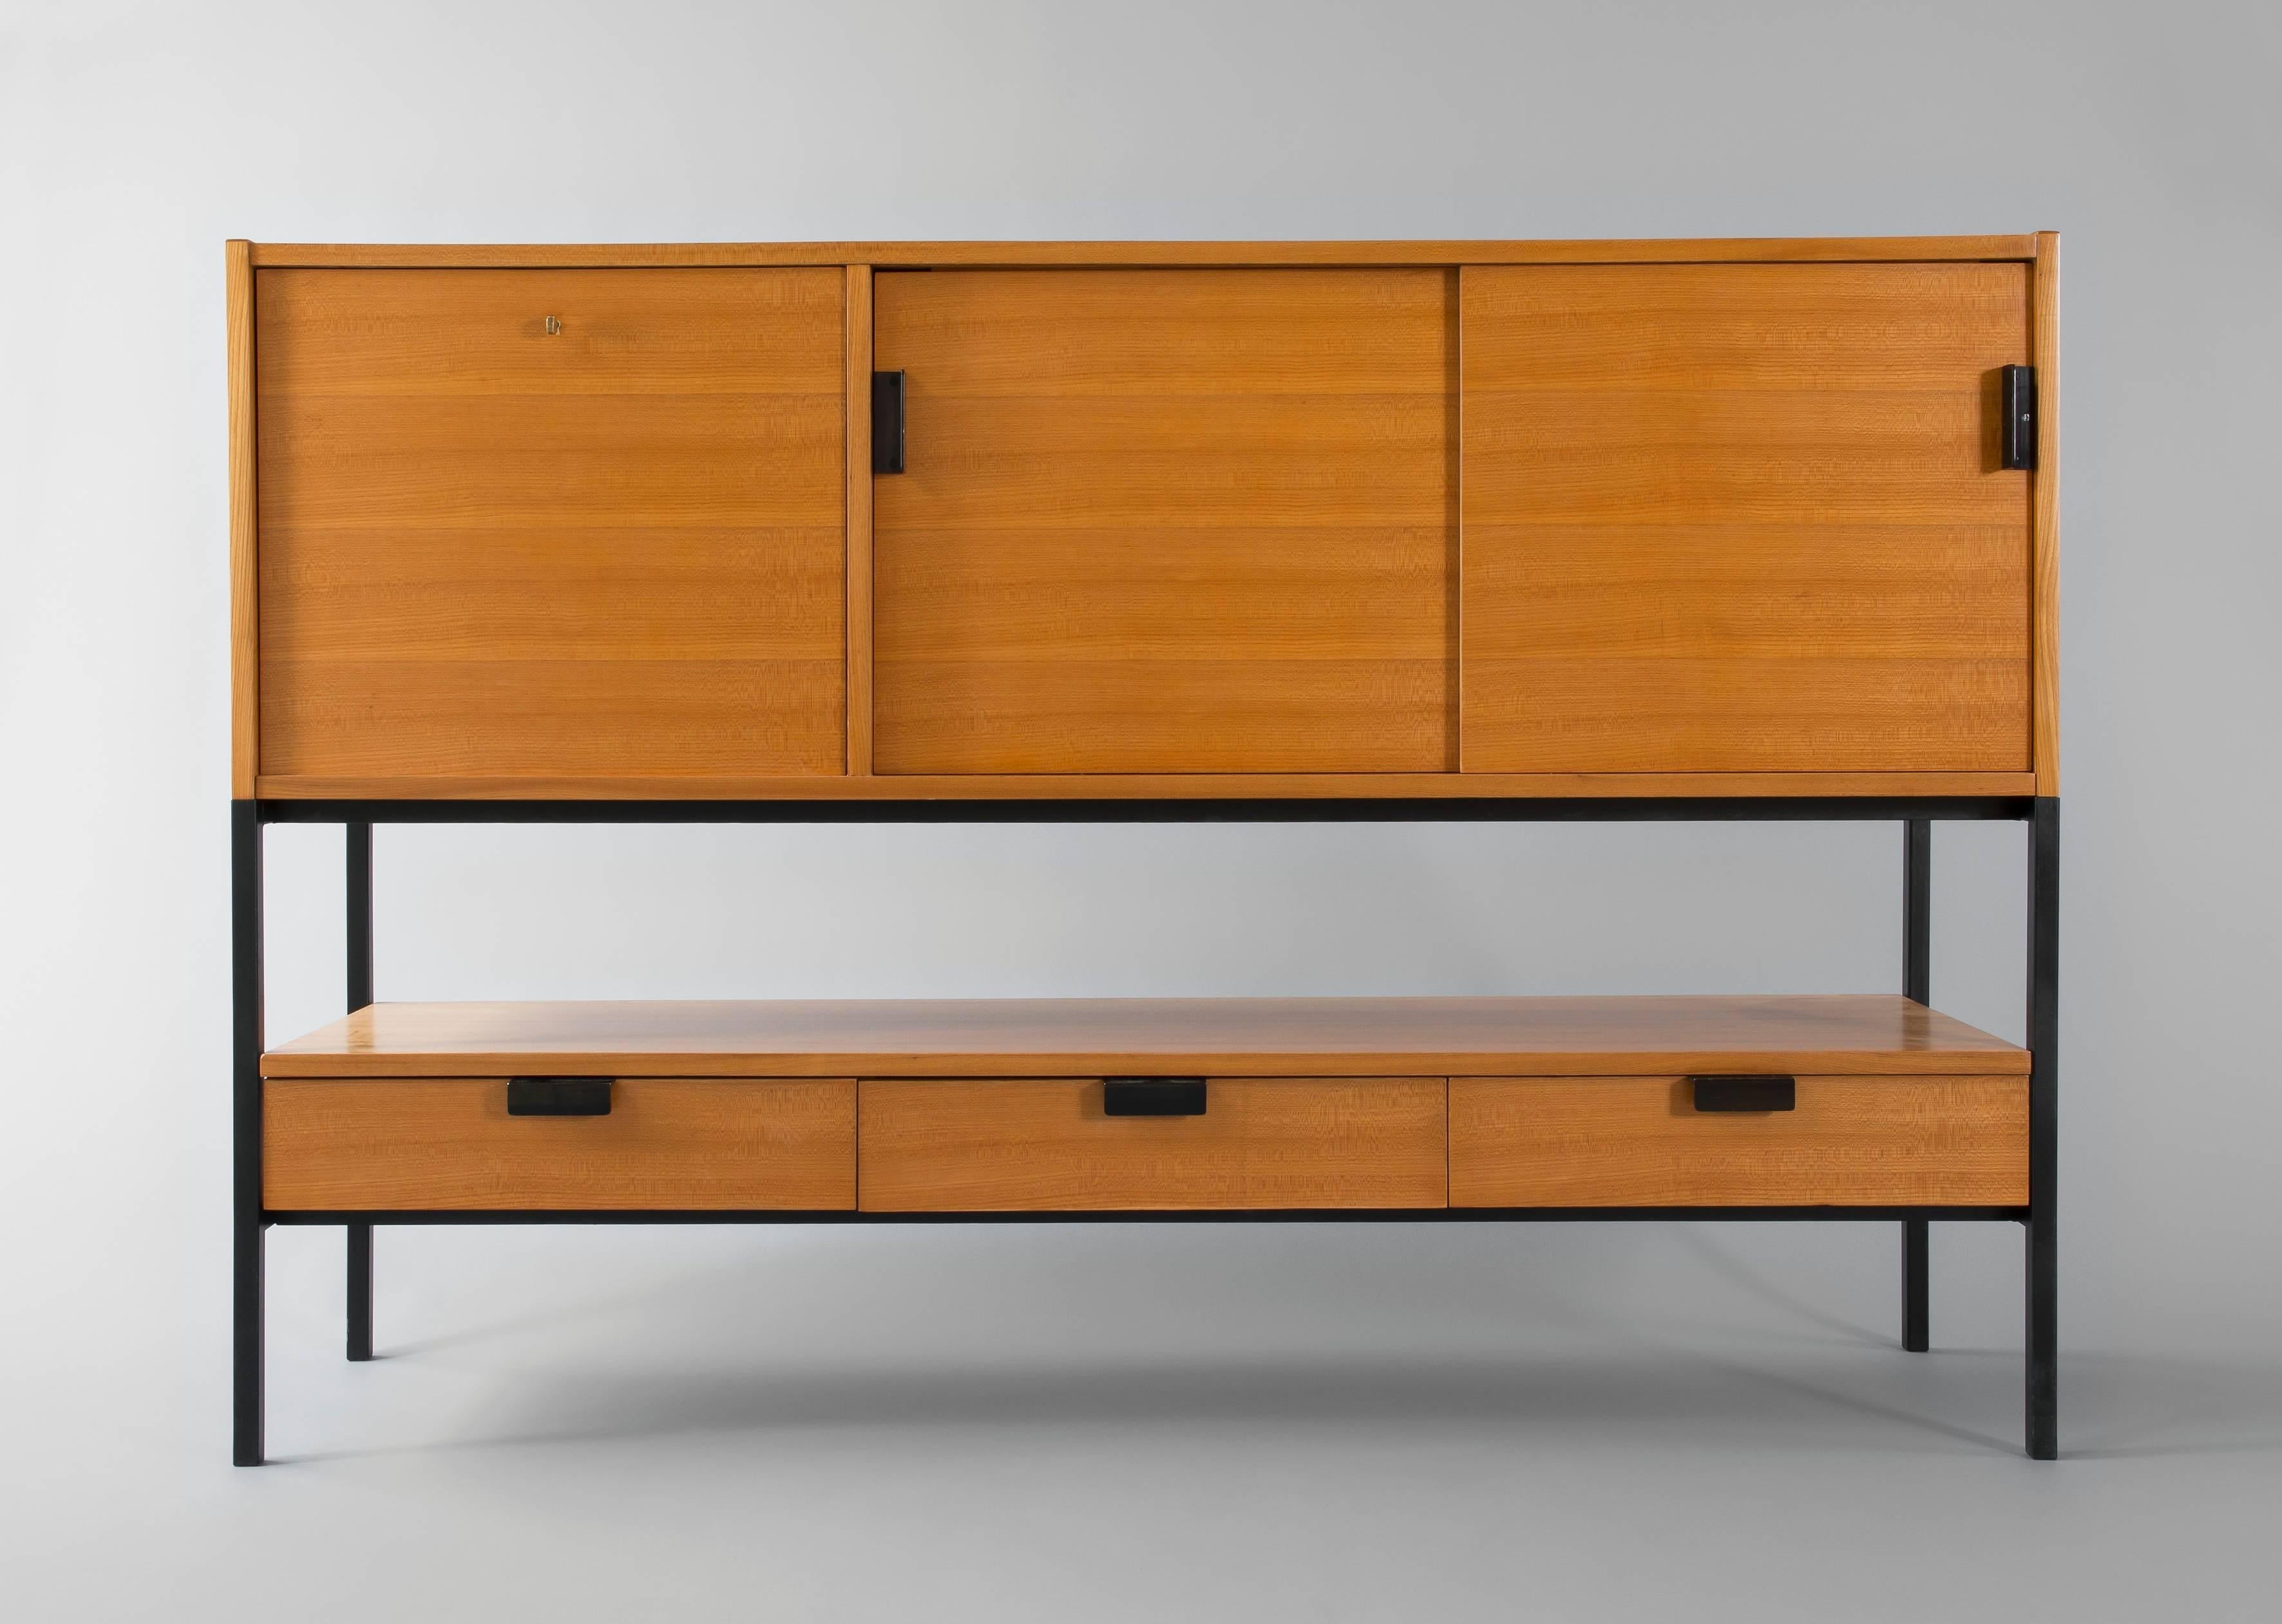 Sideboard by André Simard (1927- ).
Meubles André Simard Edition - 1955.